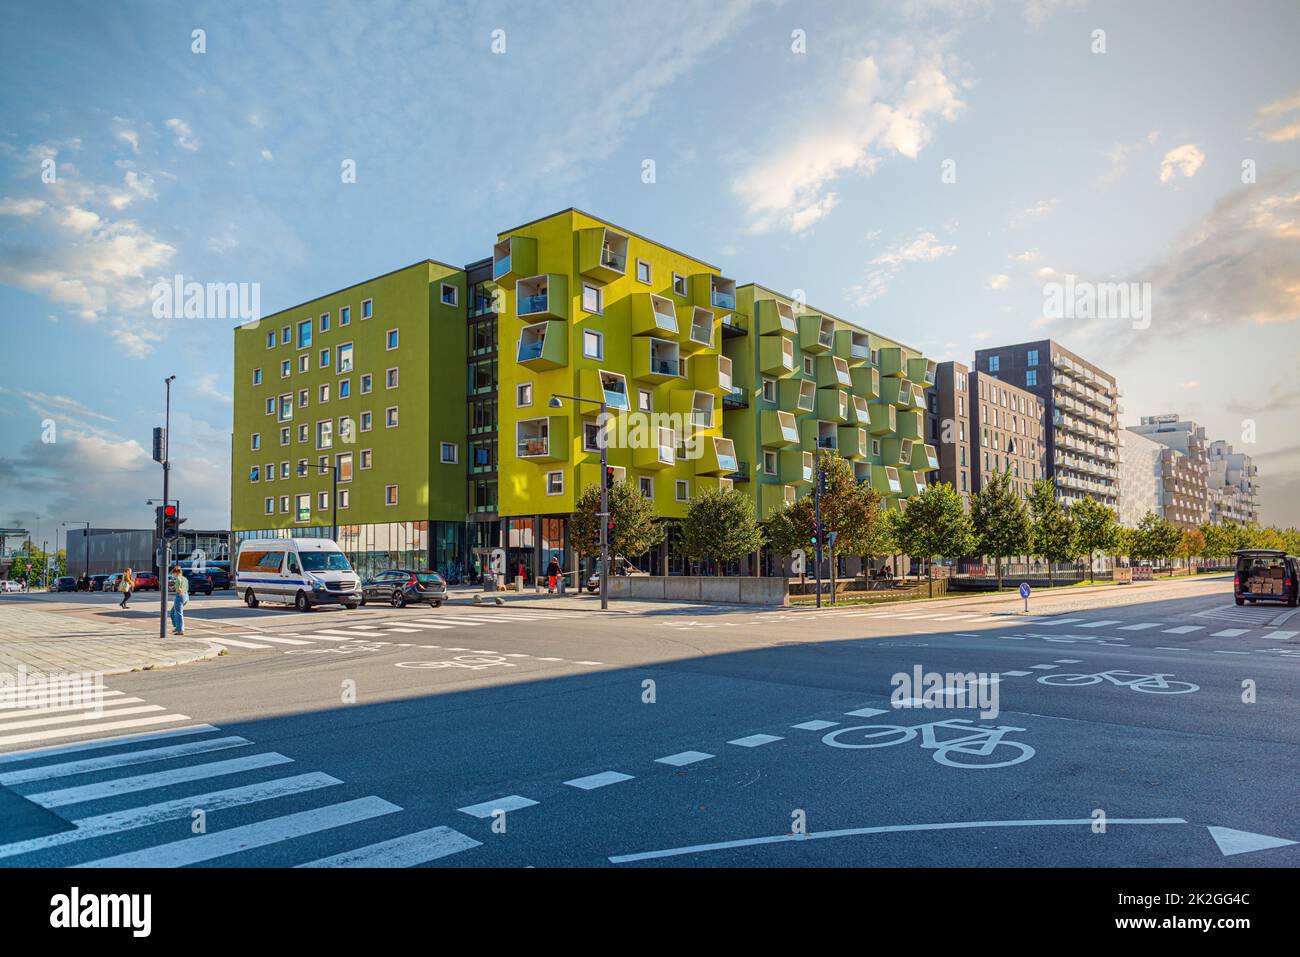 A modern residential building Ã˜restad plejecenter in bright light green color with windows and balconies in the form of cubes. Copenhagen, Denmark Stock Photo